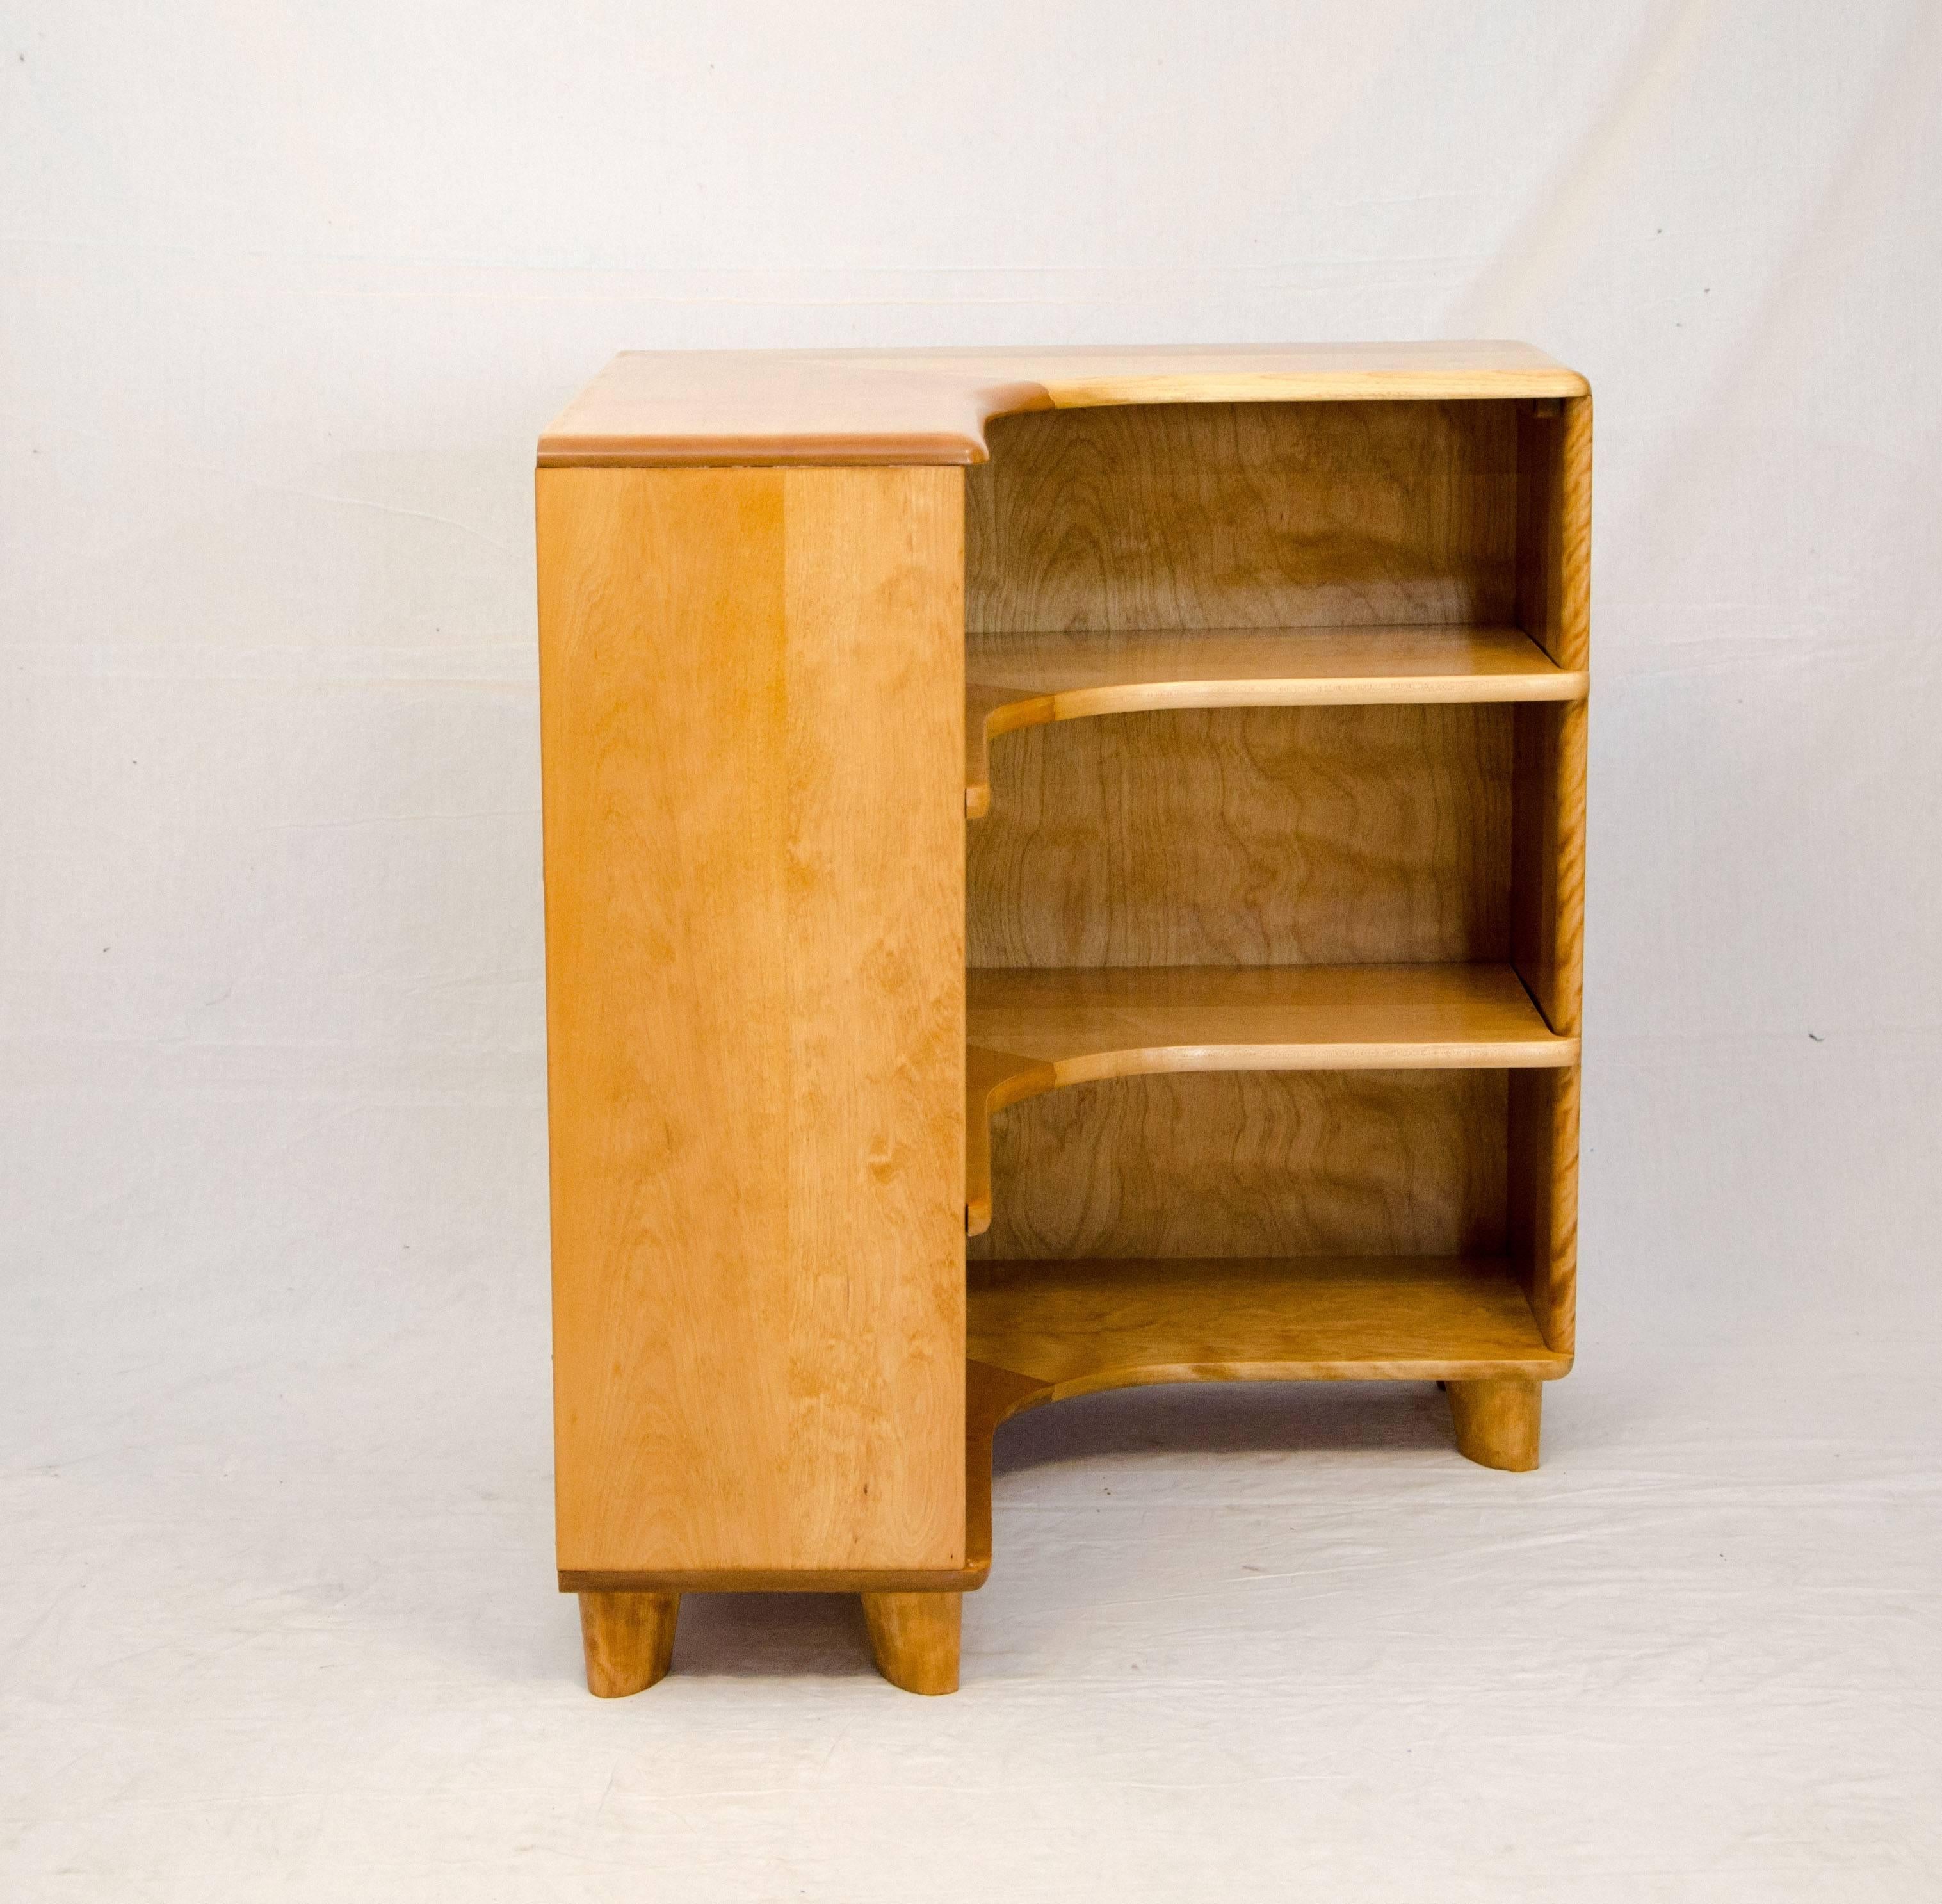 Corner bookcase with two adjustable shelves, manufactured by the Heywood-Wakefield Company from 1947-1961. A versatile item that can be used alone or with other straight bookcases positioned on both sides.